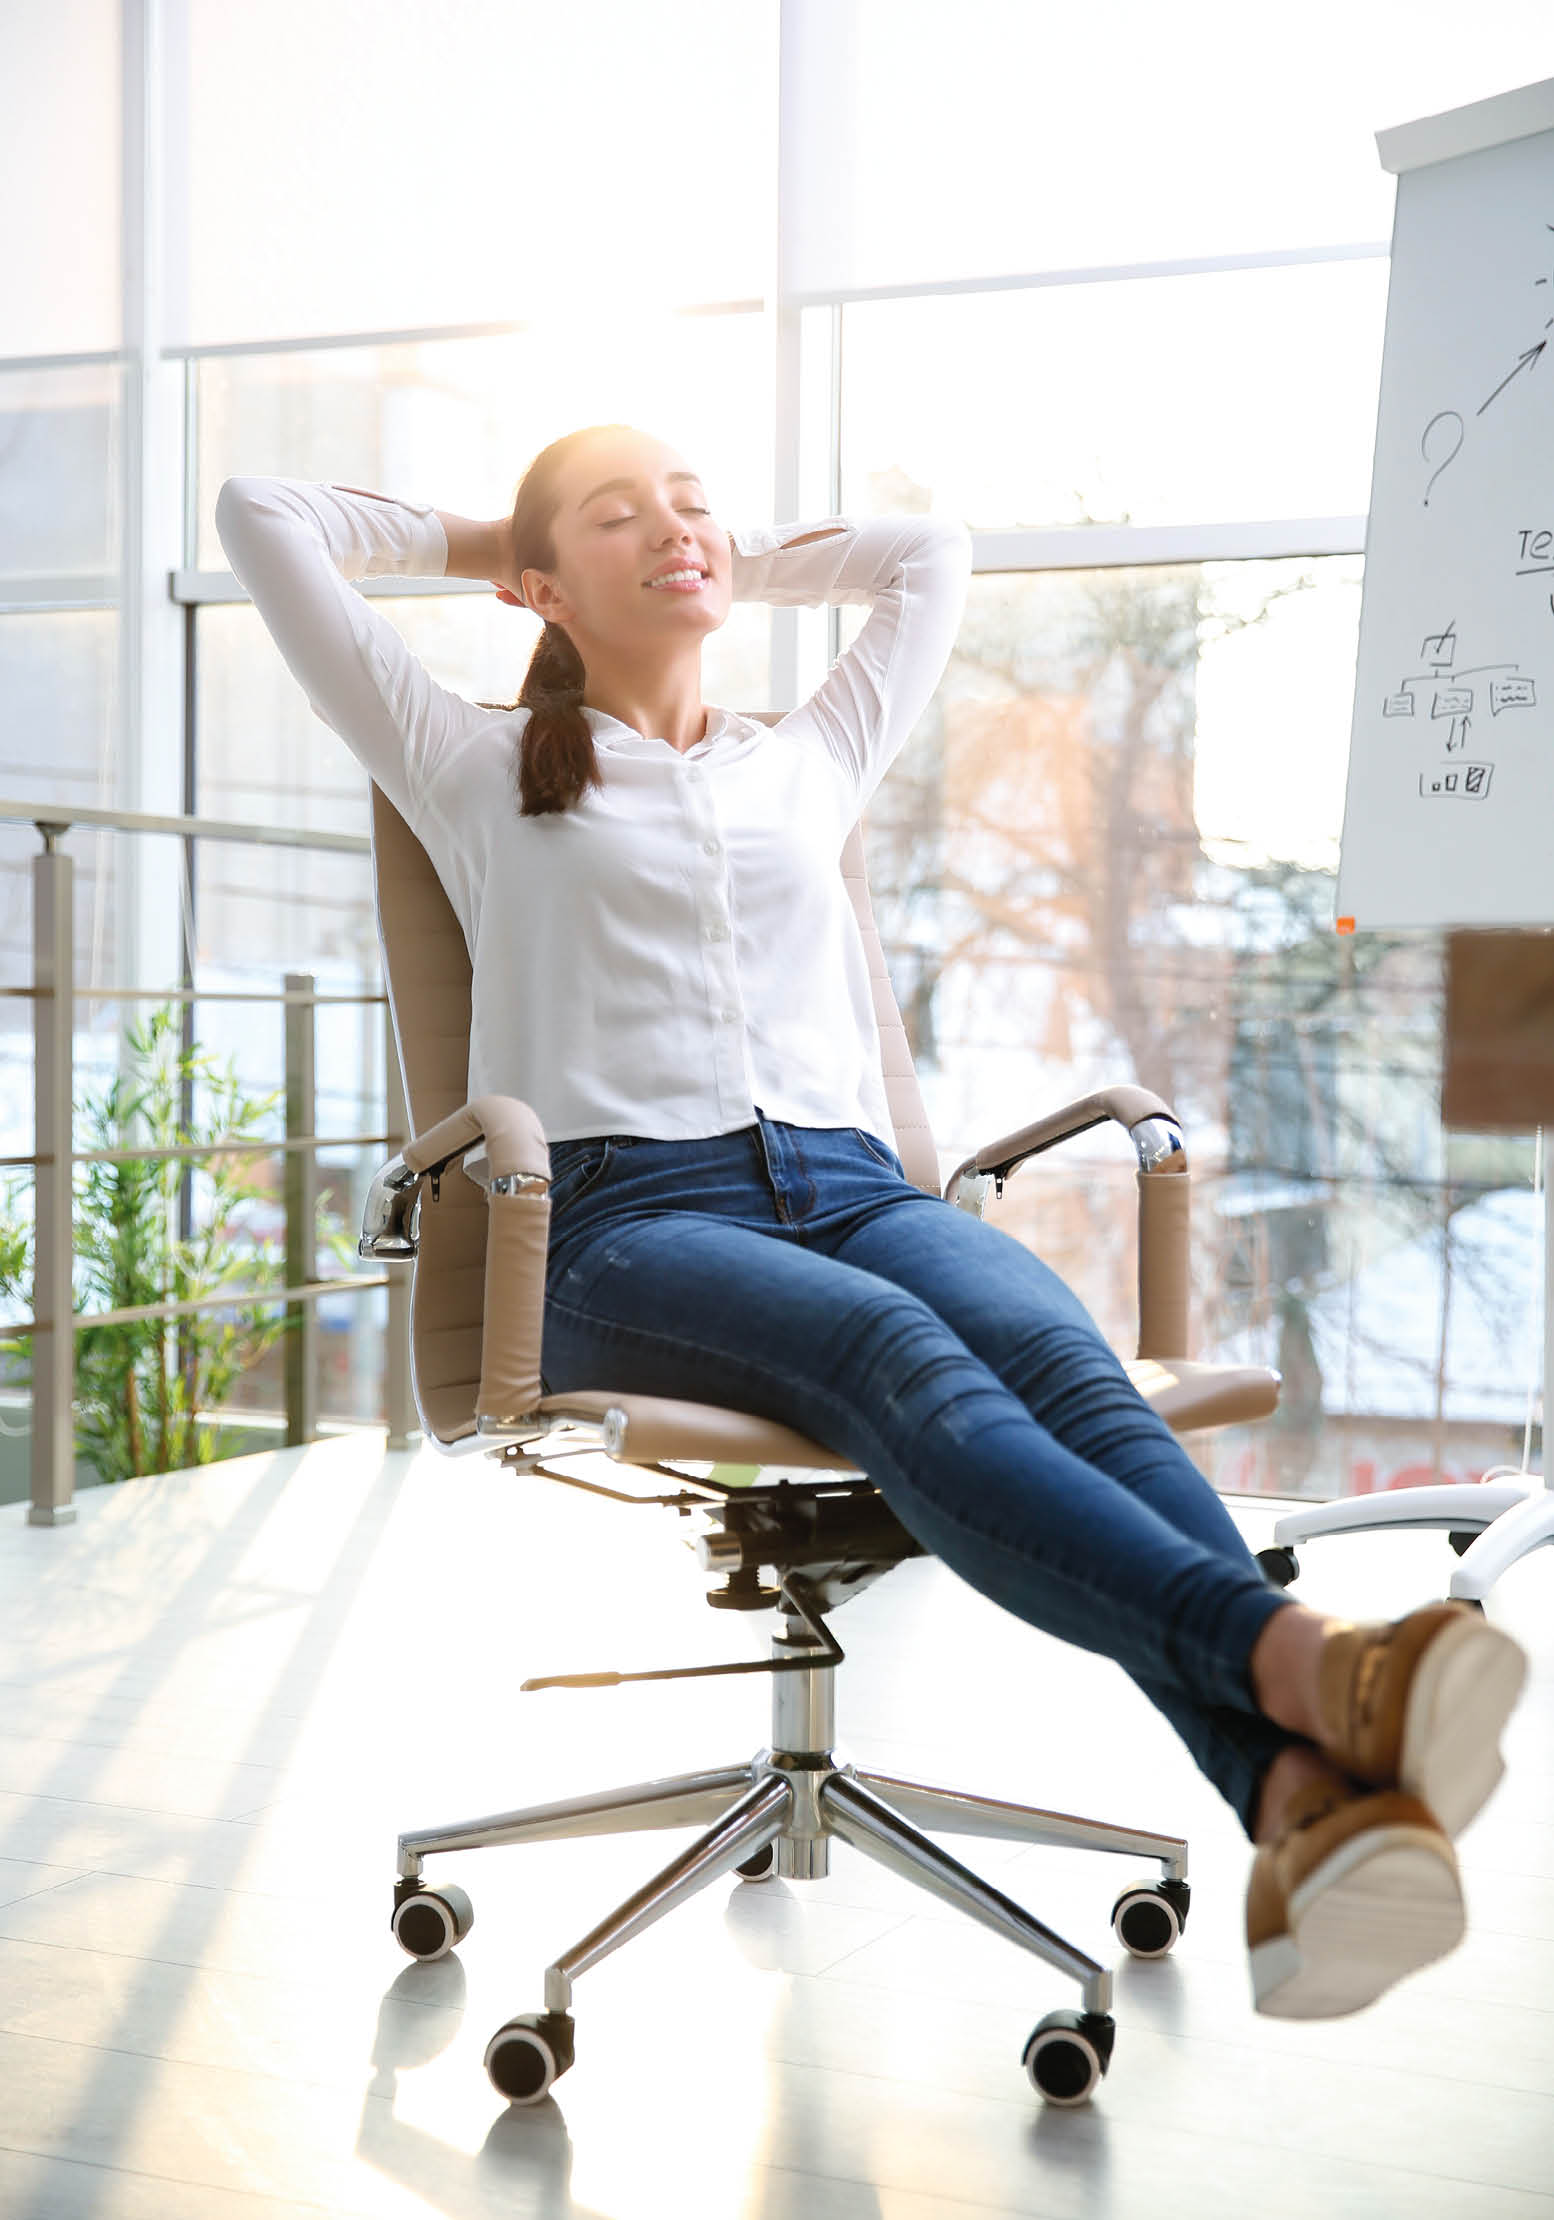 Young woman relaxing in office chair at workplace